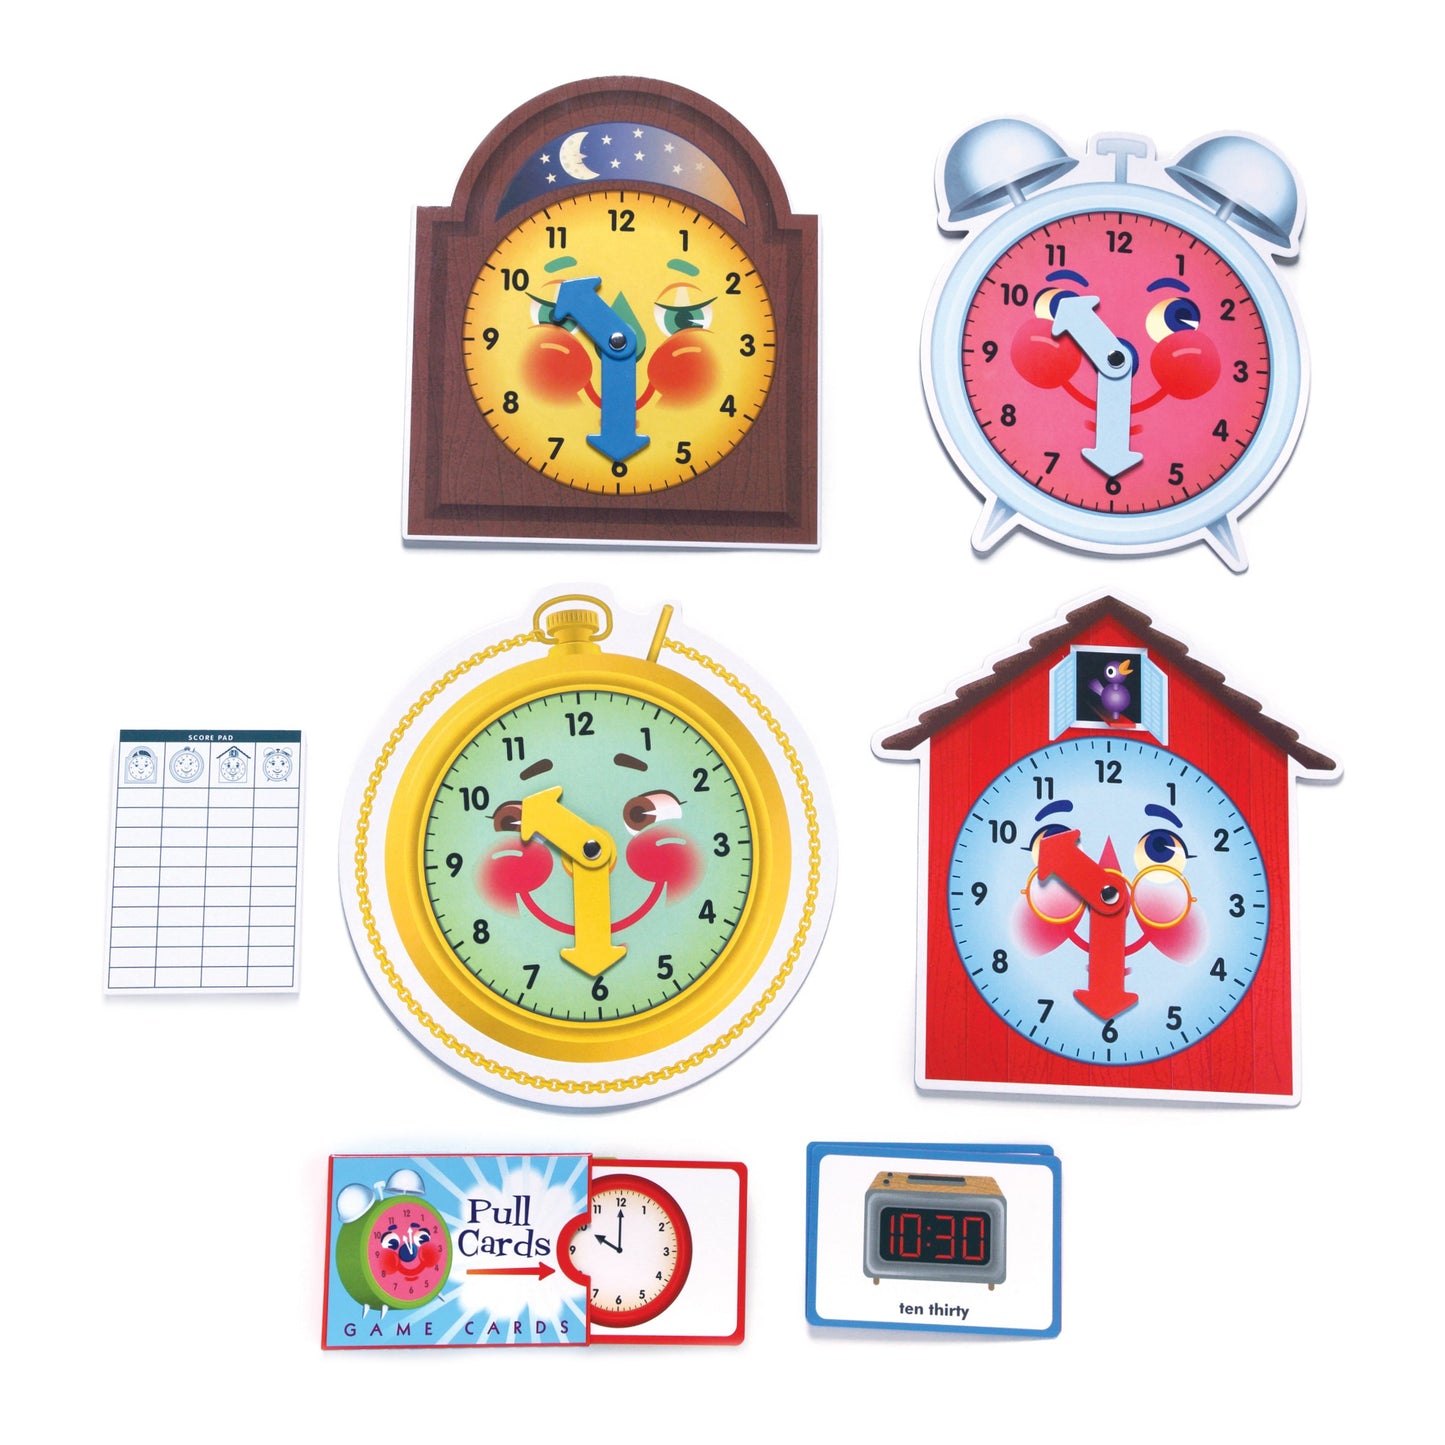 Time Telling Learn to Read a Clock Award Winning Game by eeBoo for Kids Ages 5+